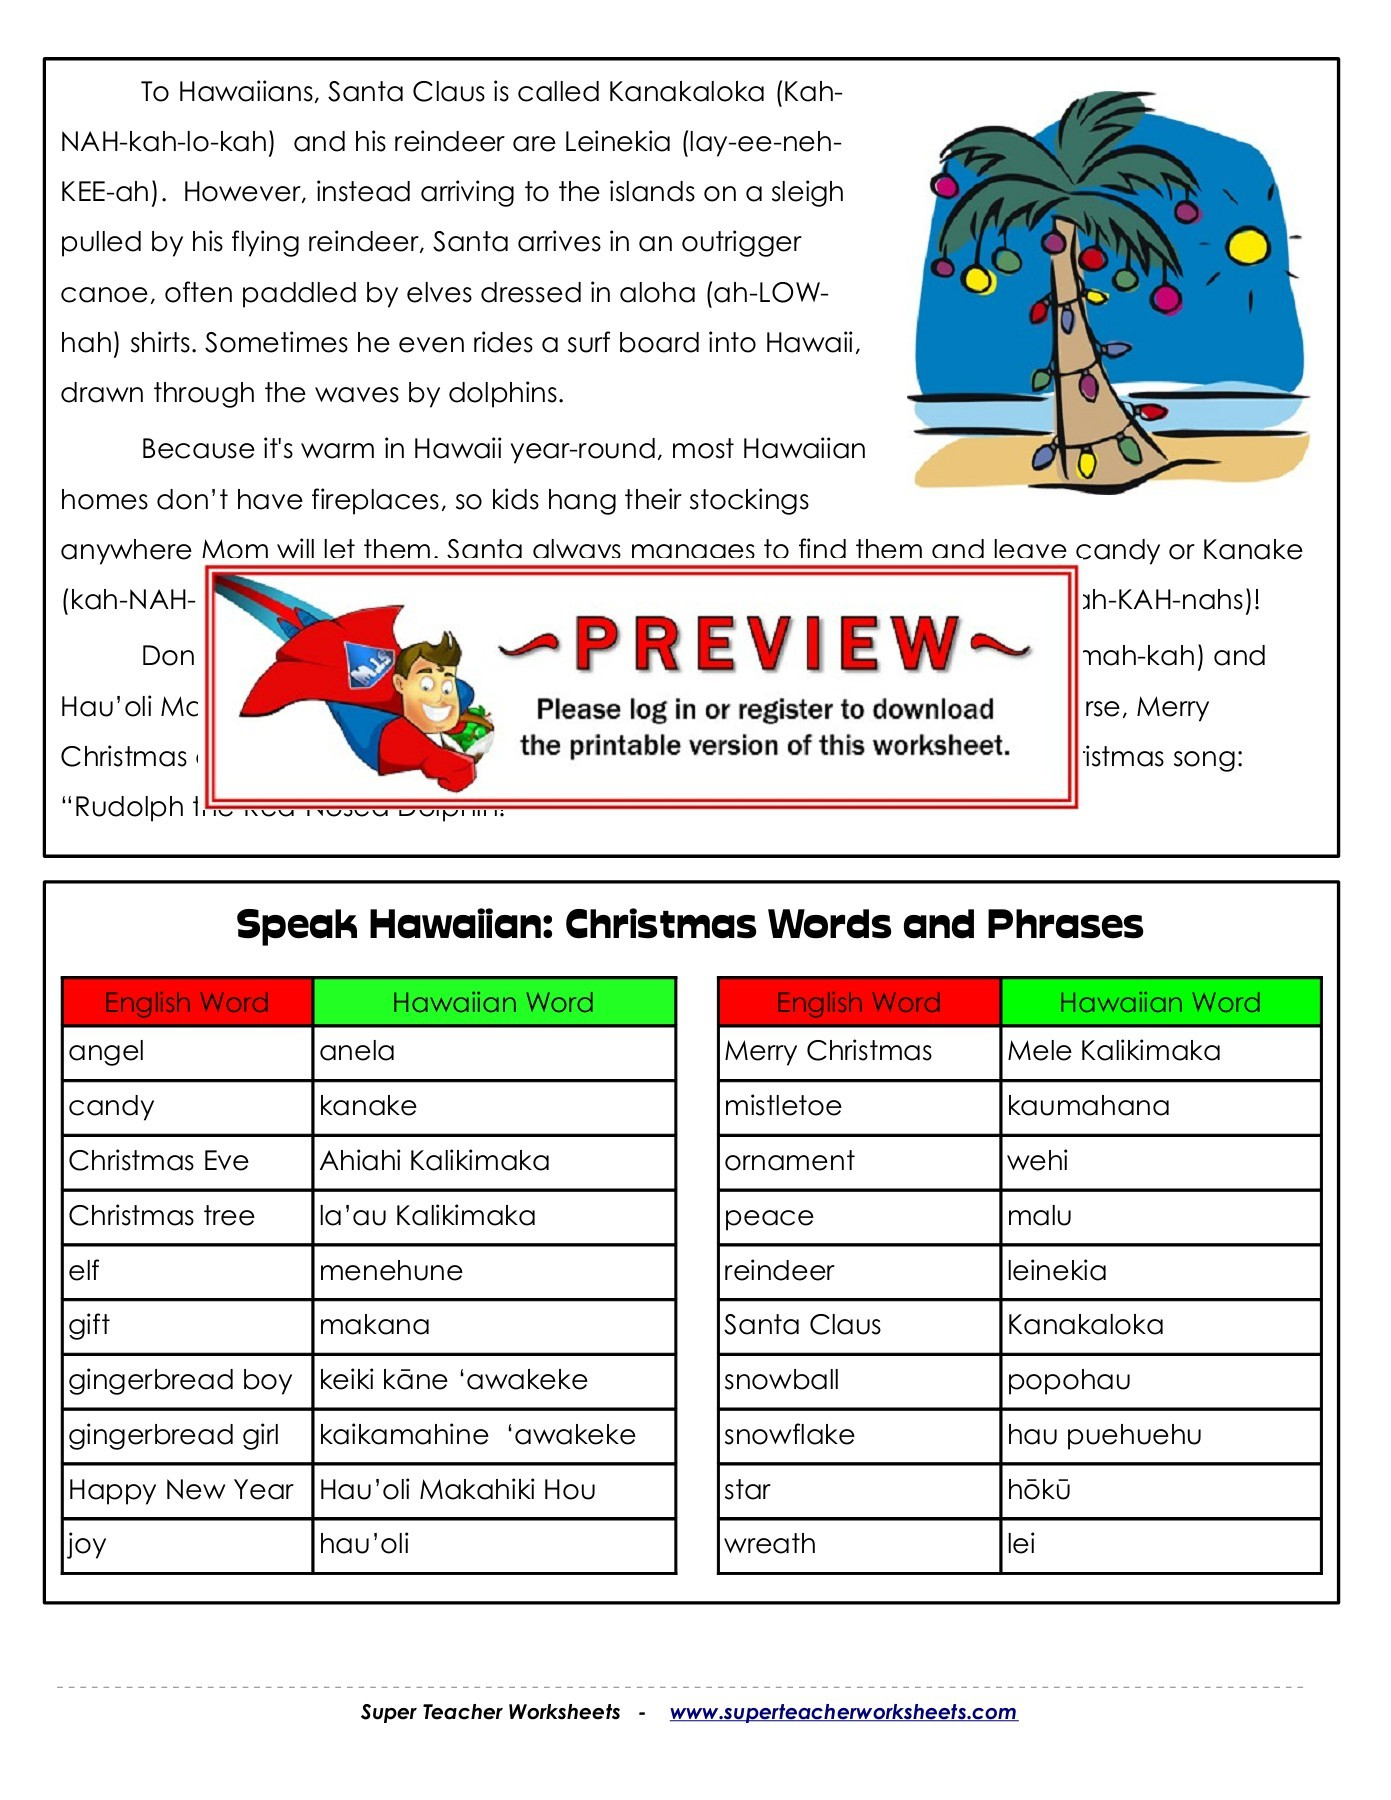 Christmas In Hawaii - Super Teacher Worksheets Pages 1 - 7